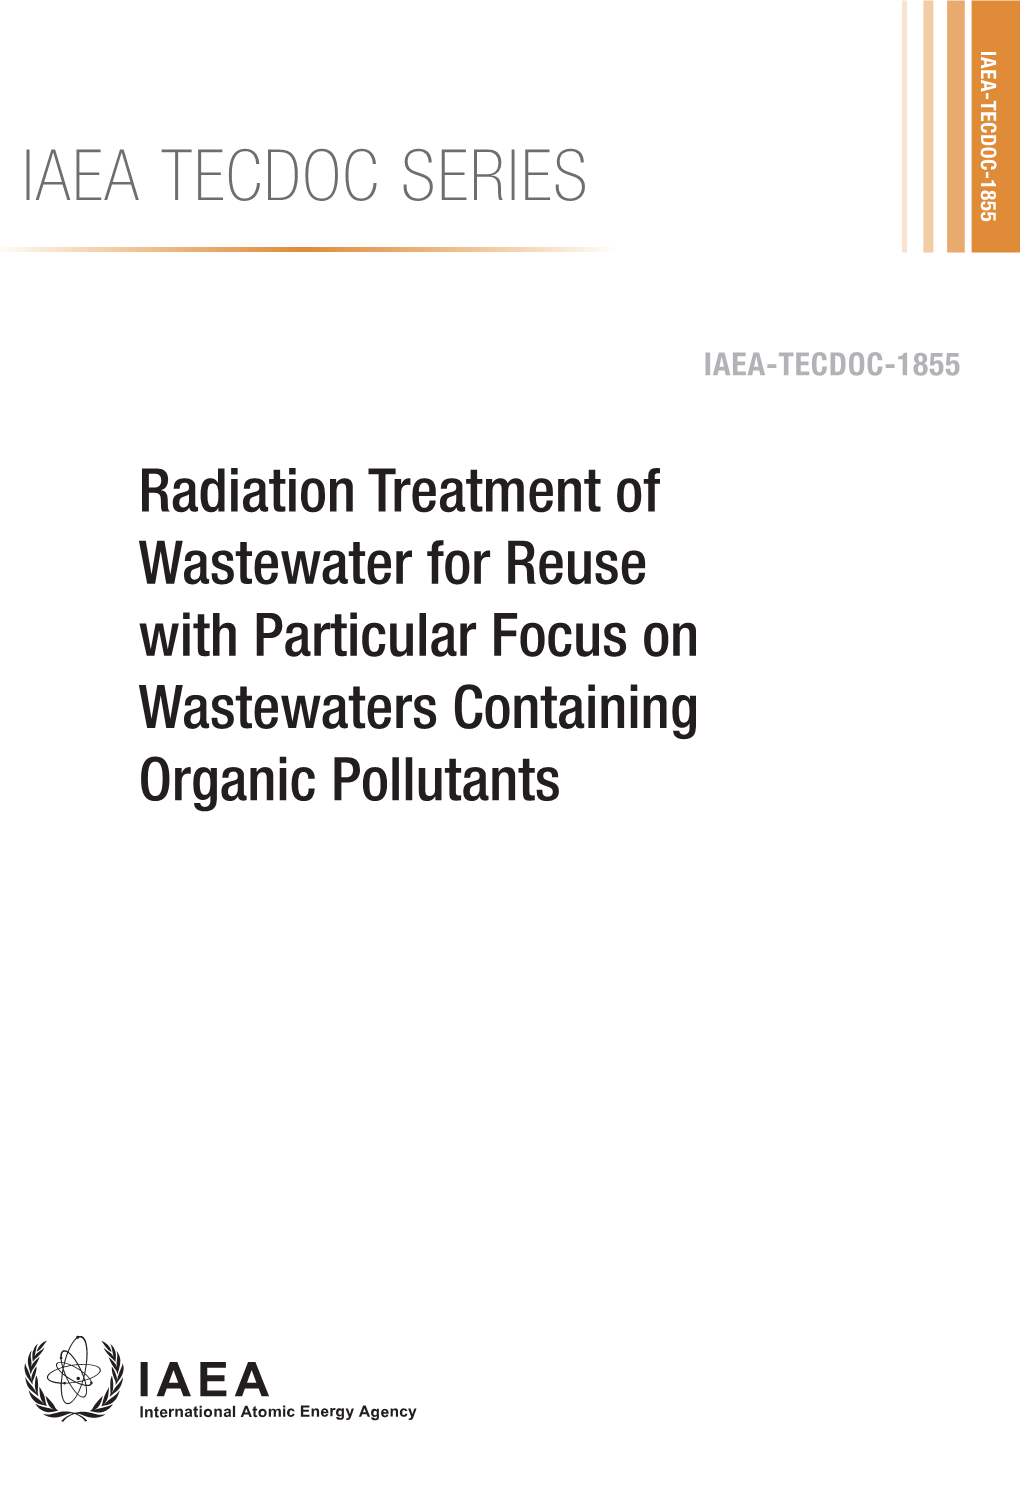 IAEA TECDOC SERIES Radiation Radiation Treatment of Wastewater for Reuse with Particular Focus on Wastewaters Containing Organic Pollutants